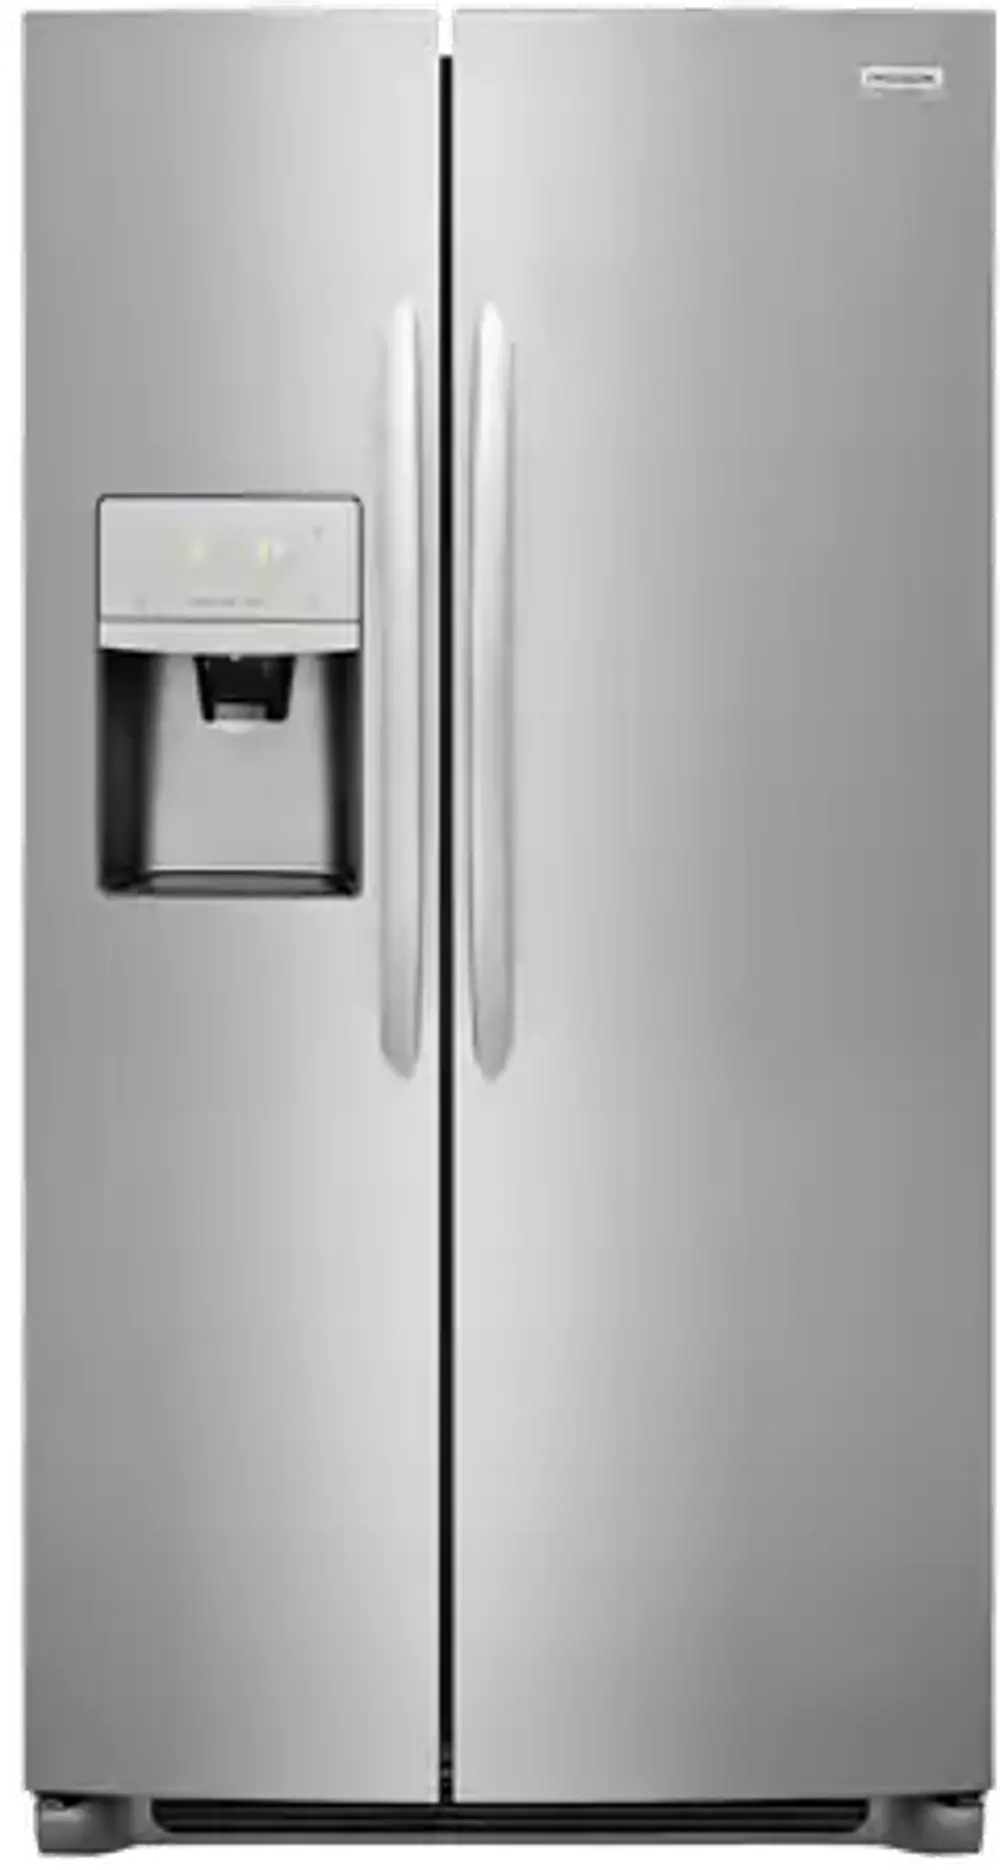 DGHX2655TF Frigidaire Gallery 25.6 cu. ft. Side by Side Refrigerator - 36 Inch Stainless Steel-1